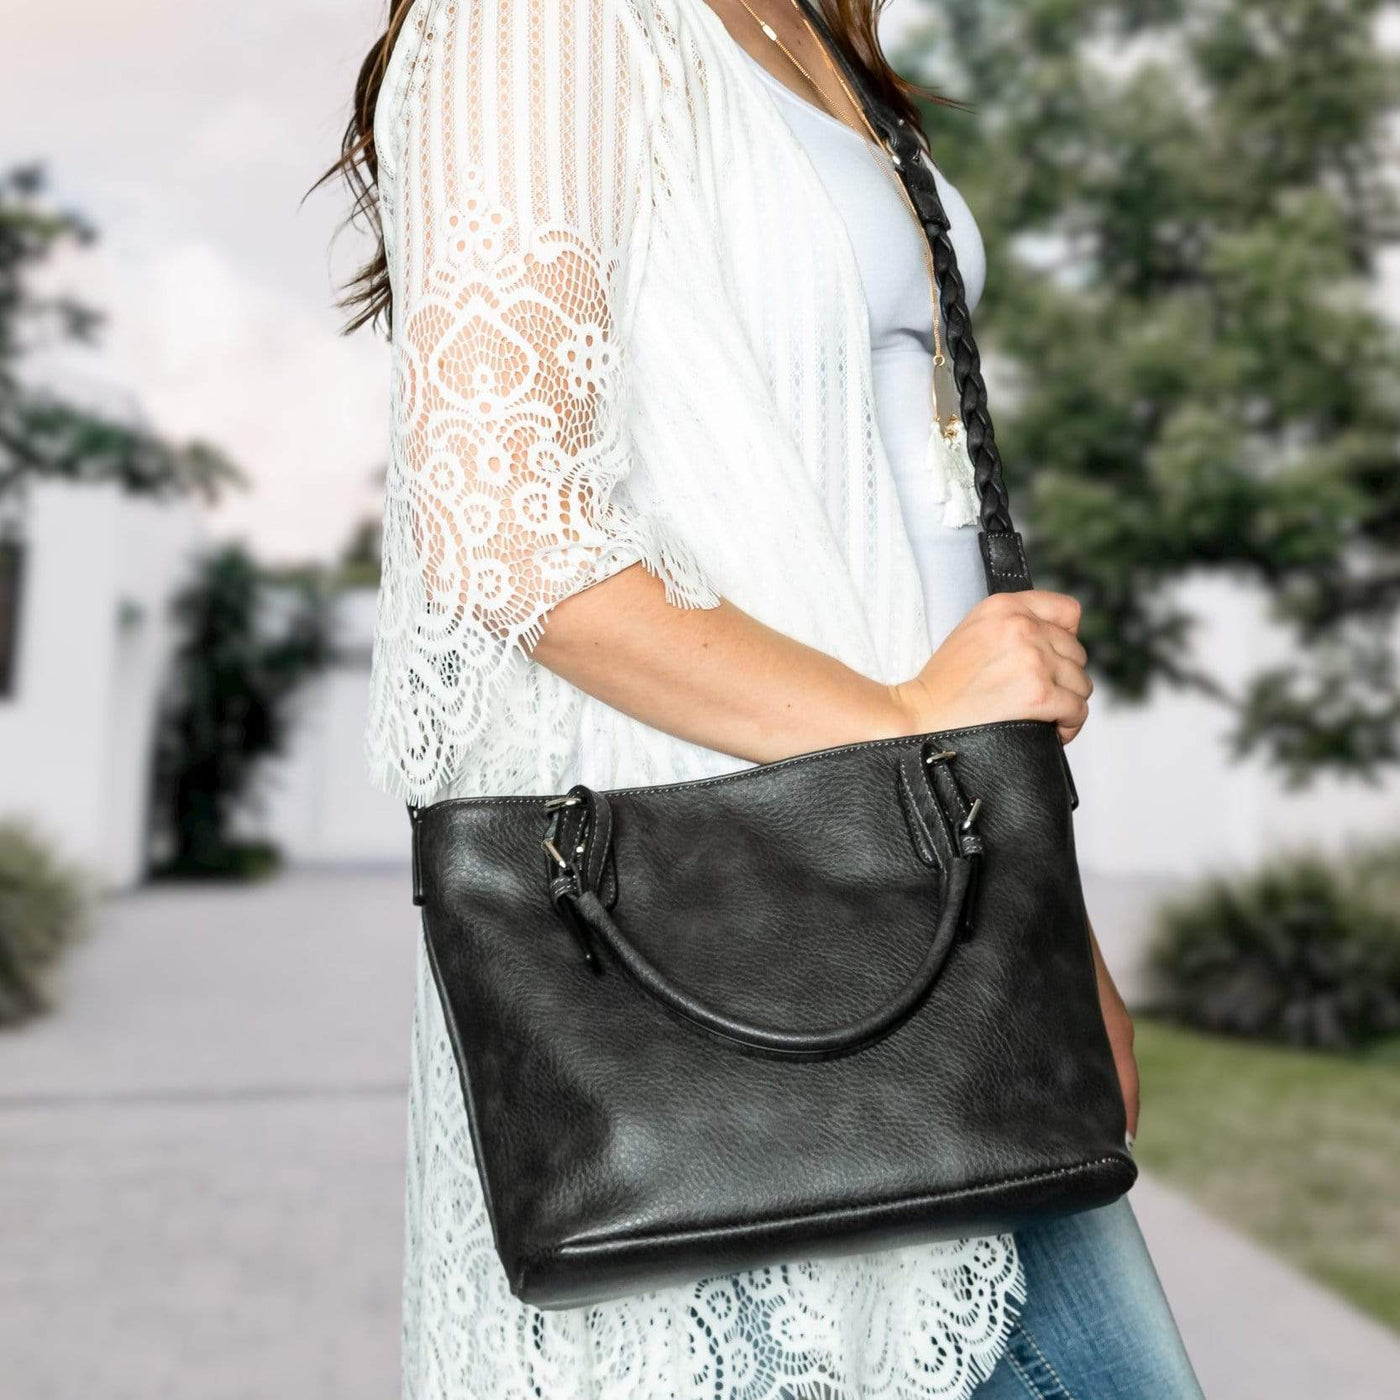 Concealed Carry Ella Tote by Lady Conceal